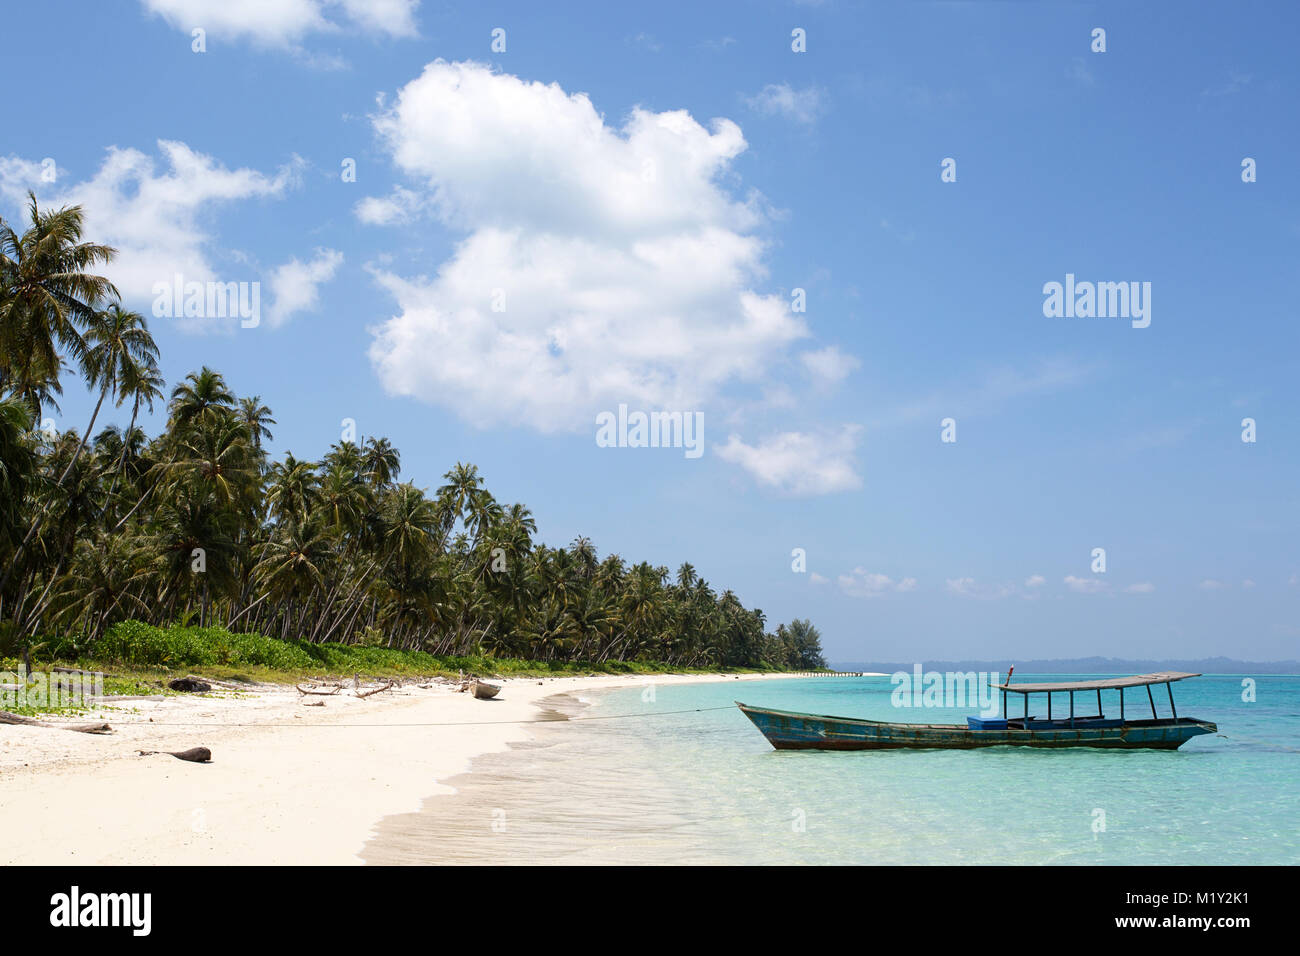 Beautiful tropical beach with crystal clear turquoise water and traditional boat Stock Photo